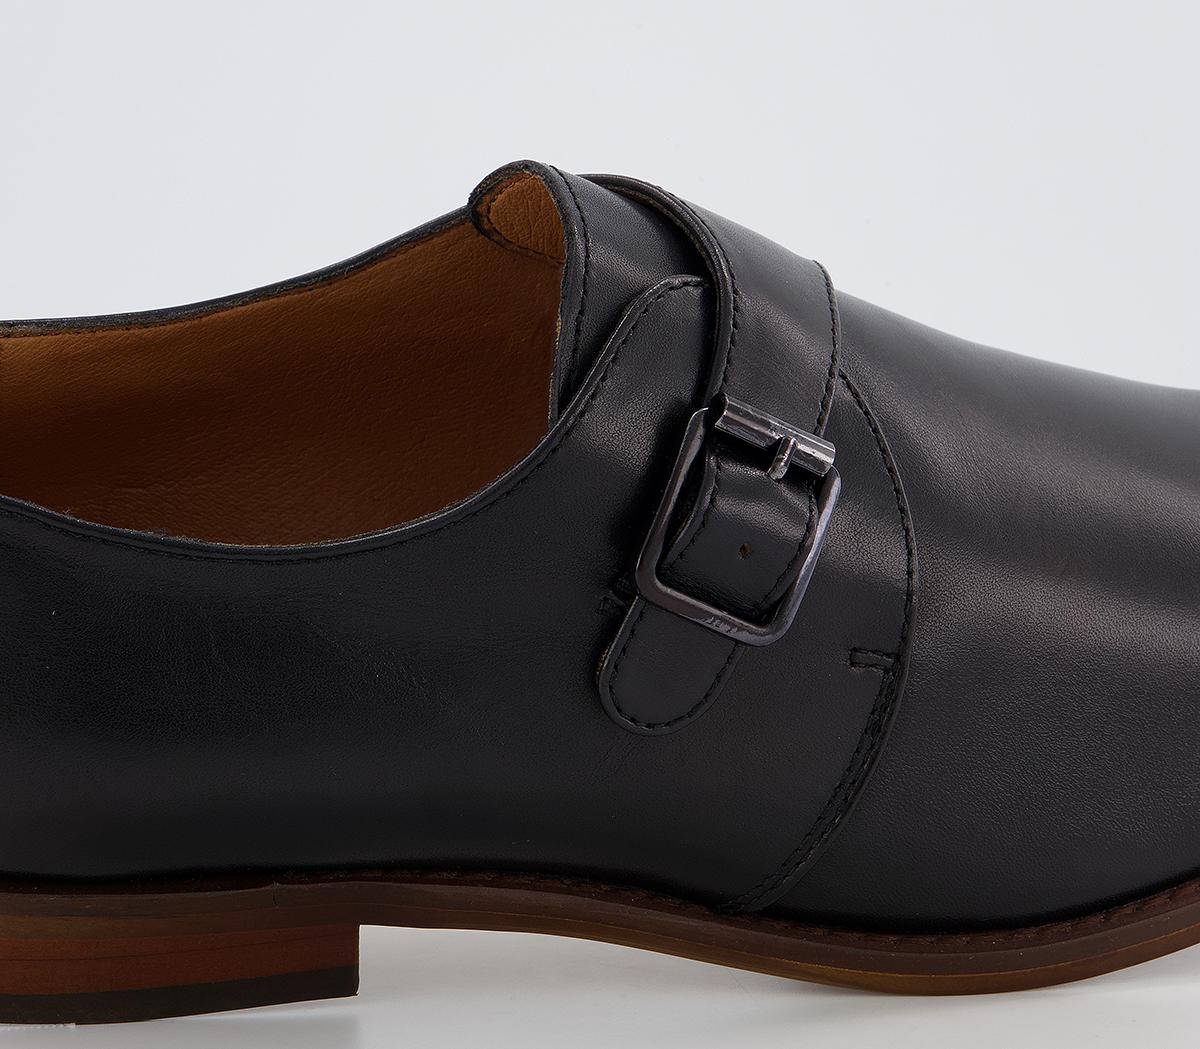 OFFICE Master Single Strap Monk Shoes Black Leather - His Exclusives